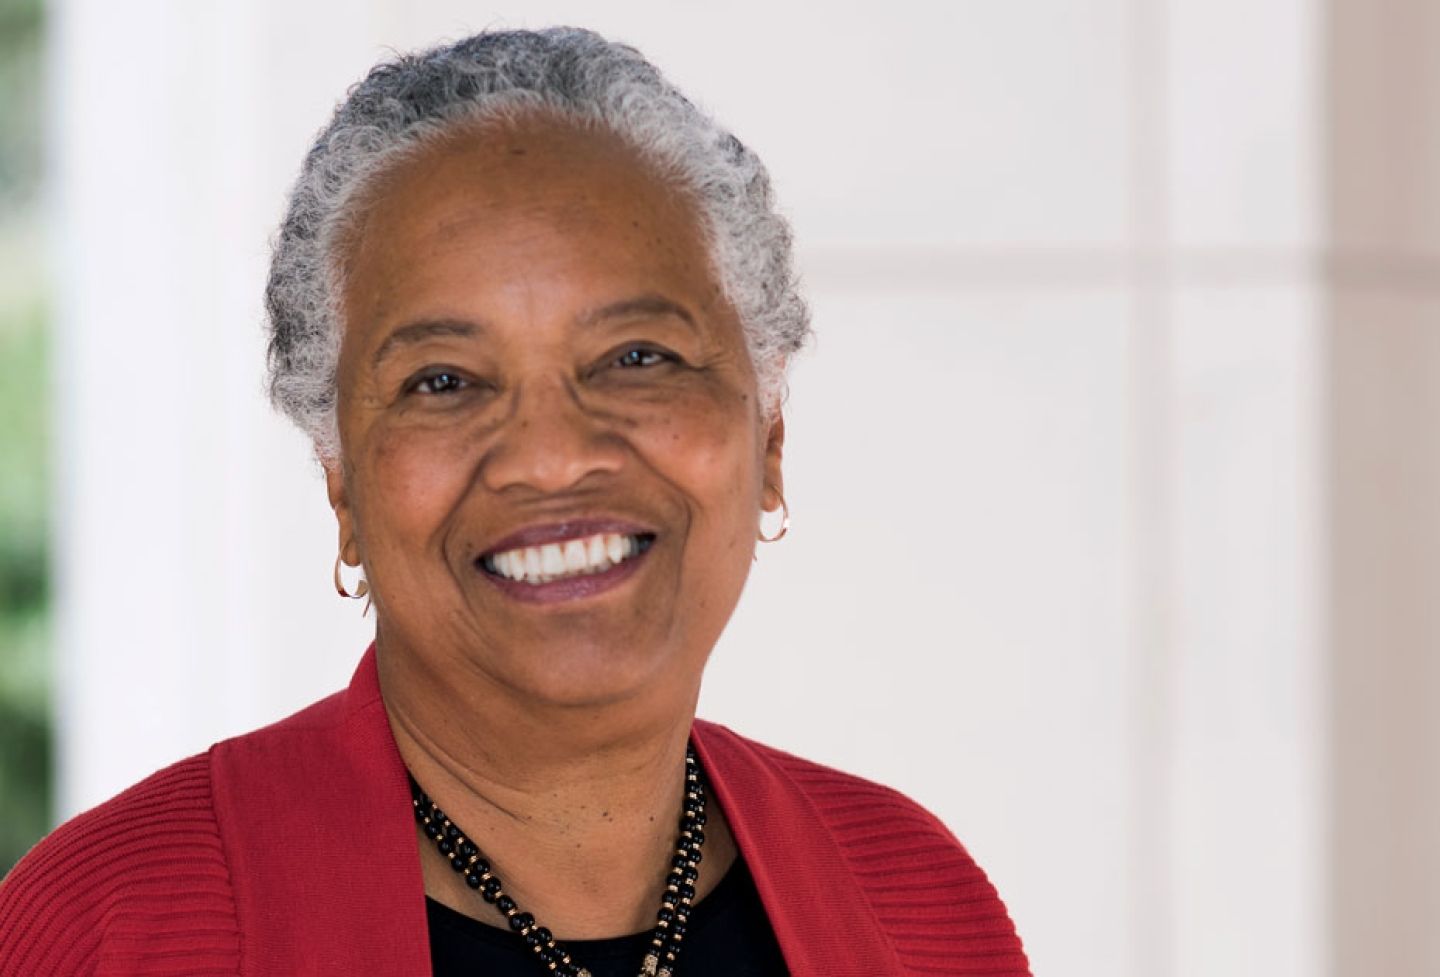 The school’s first African American female tenured professor, Mildred Robinson, a groundbreaking tax law instructor whose scholarship and community service emphasized equity, wrapped up teaching in the fall and retired in the spring.